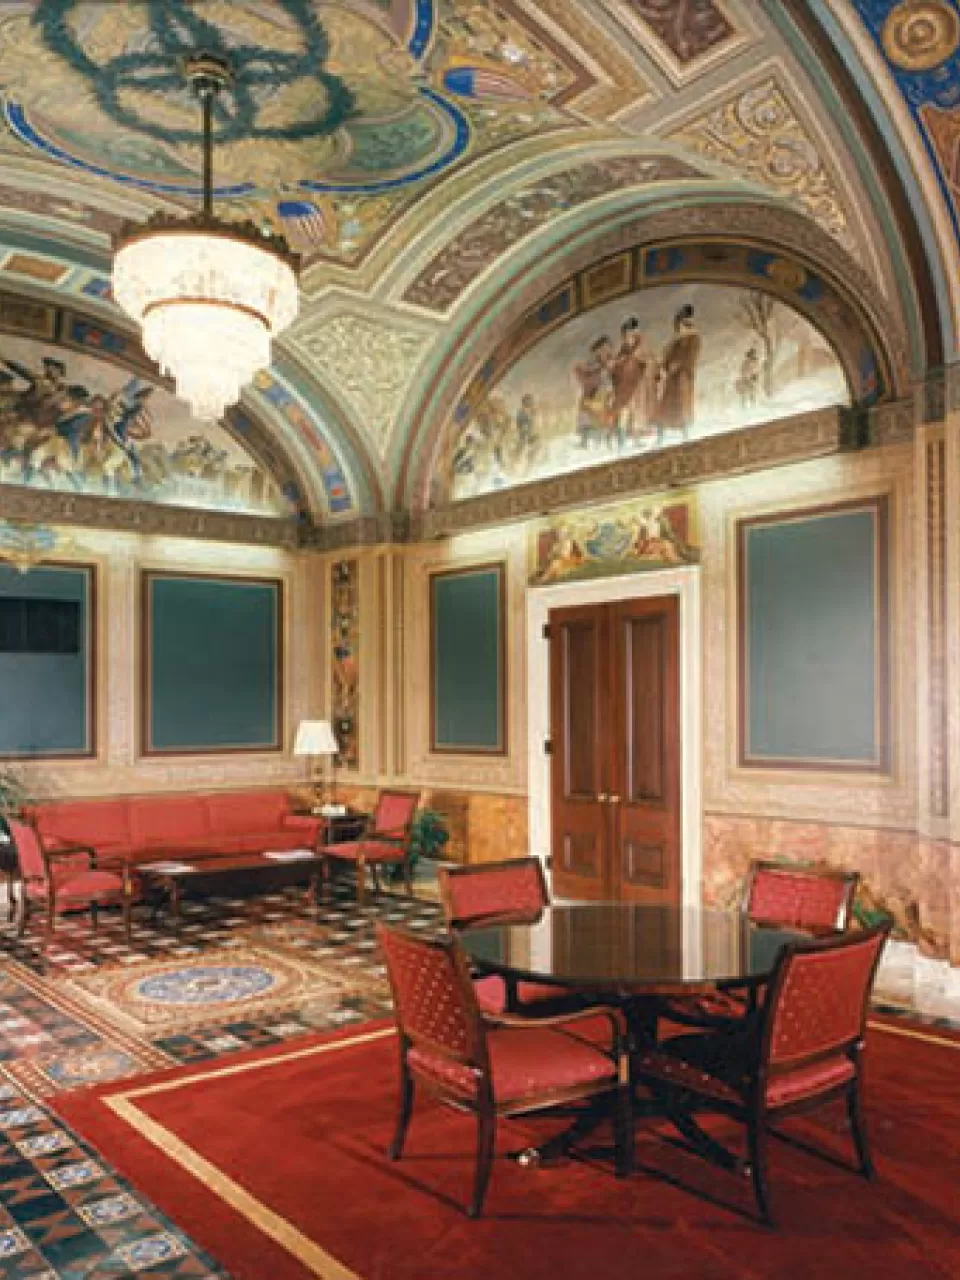 Room S-128 of the U.S. Capitol was originally designed for the Senate Military Affairs Committee.